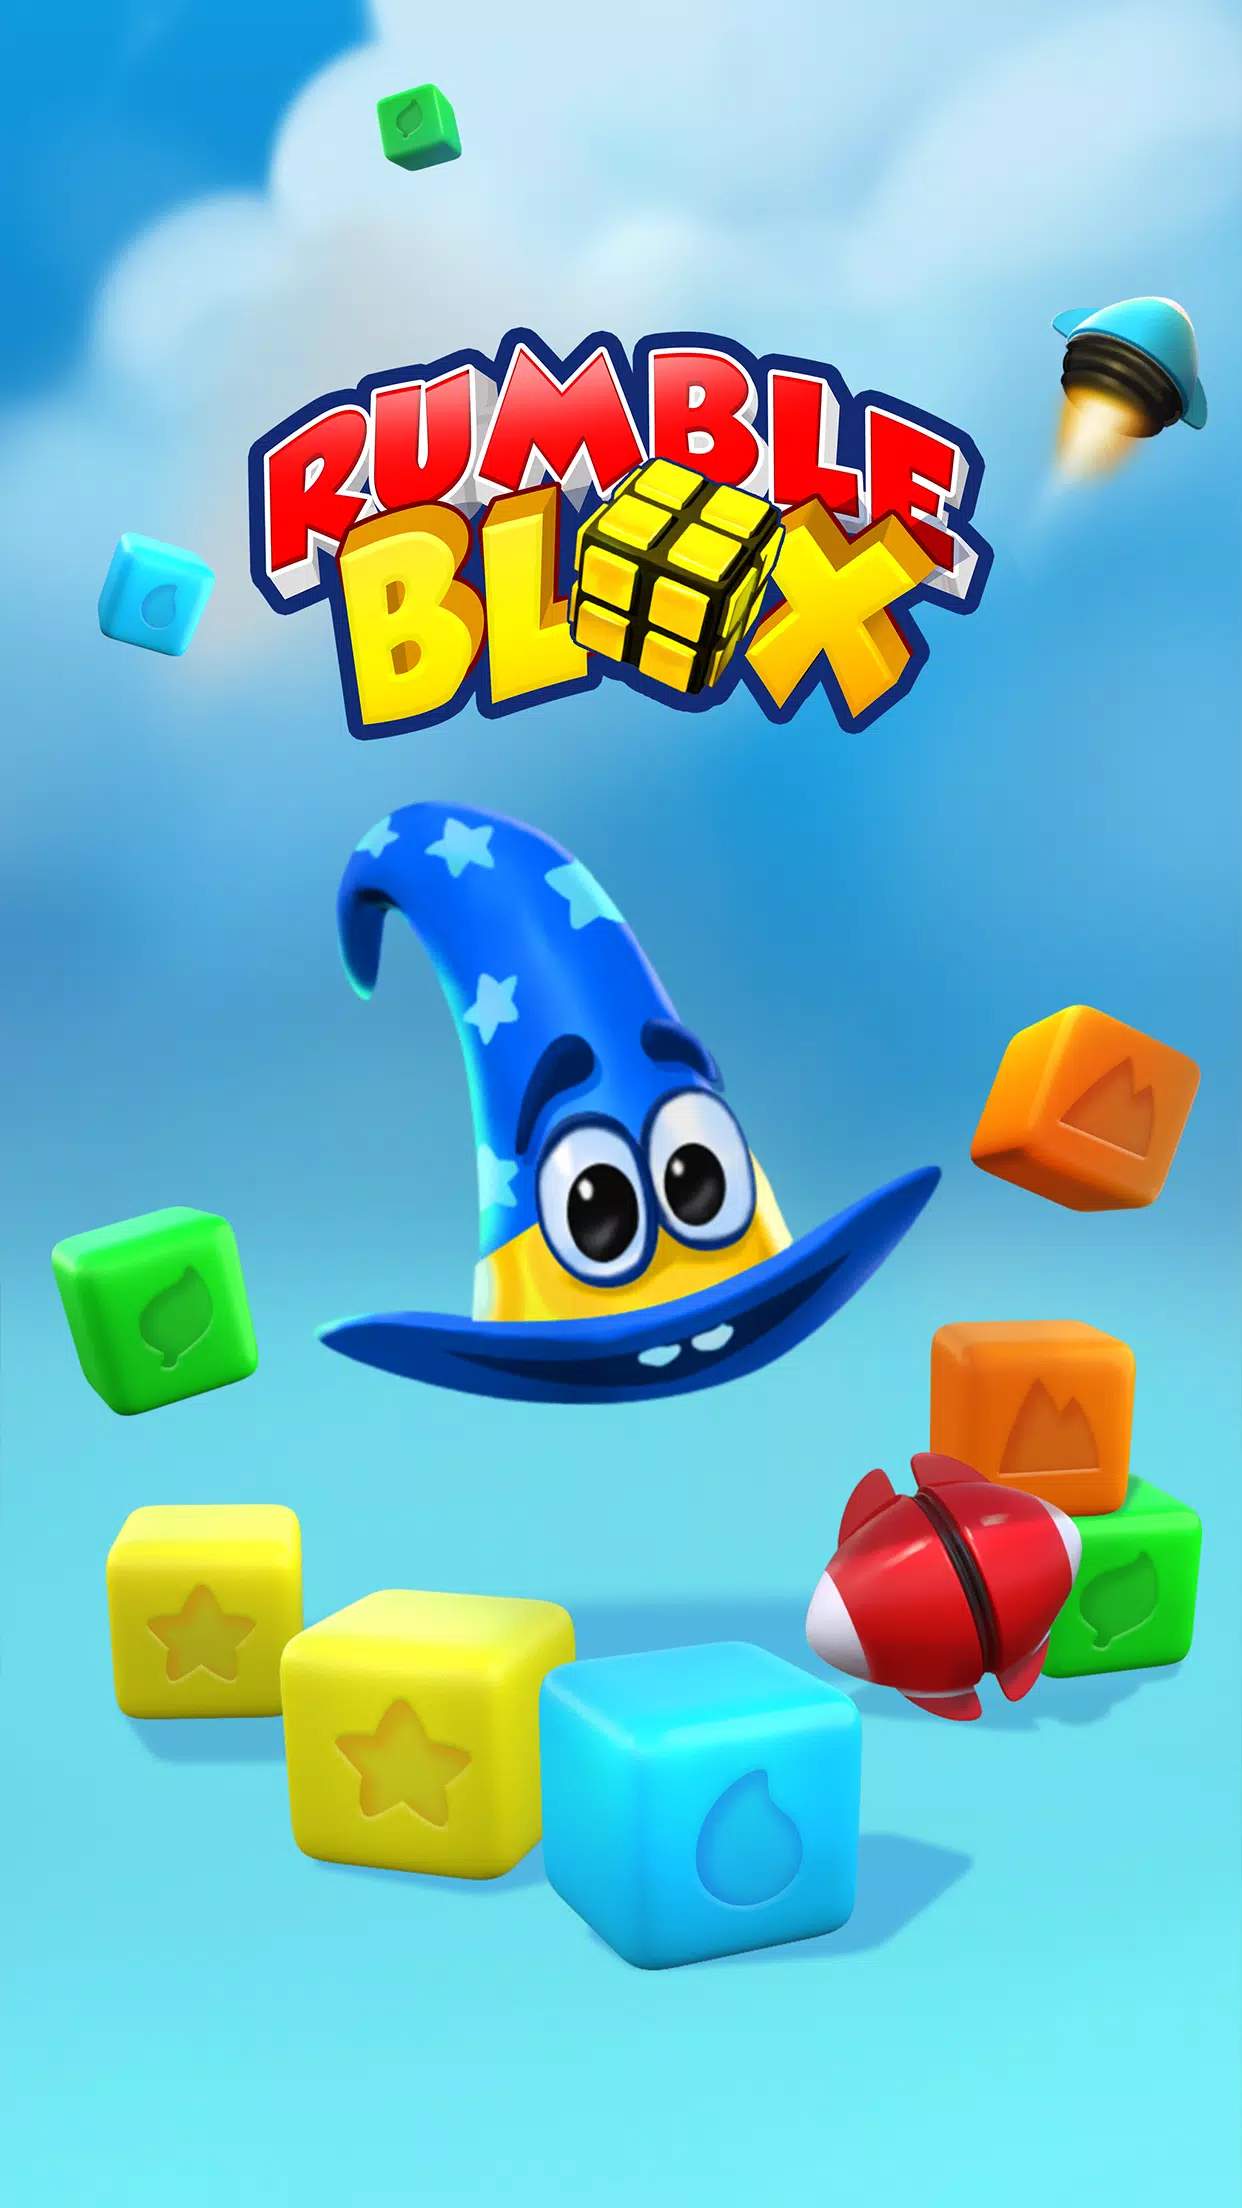 How To Be Good With Rumble  Blox Fruit Guide 